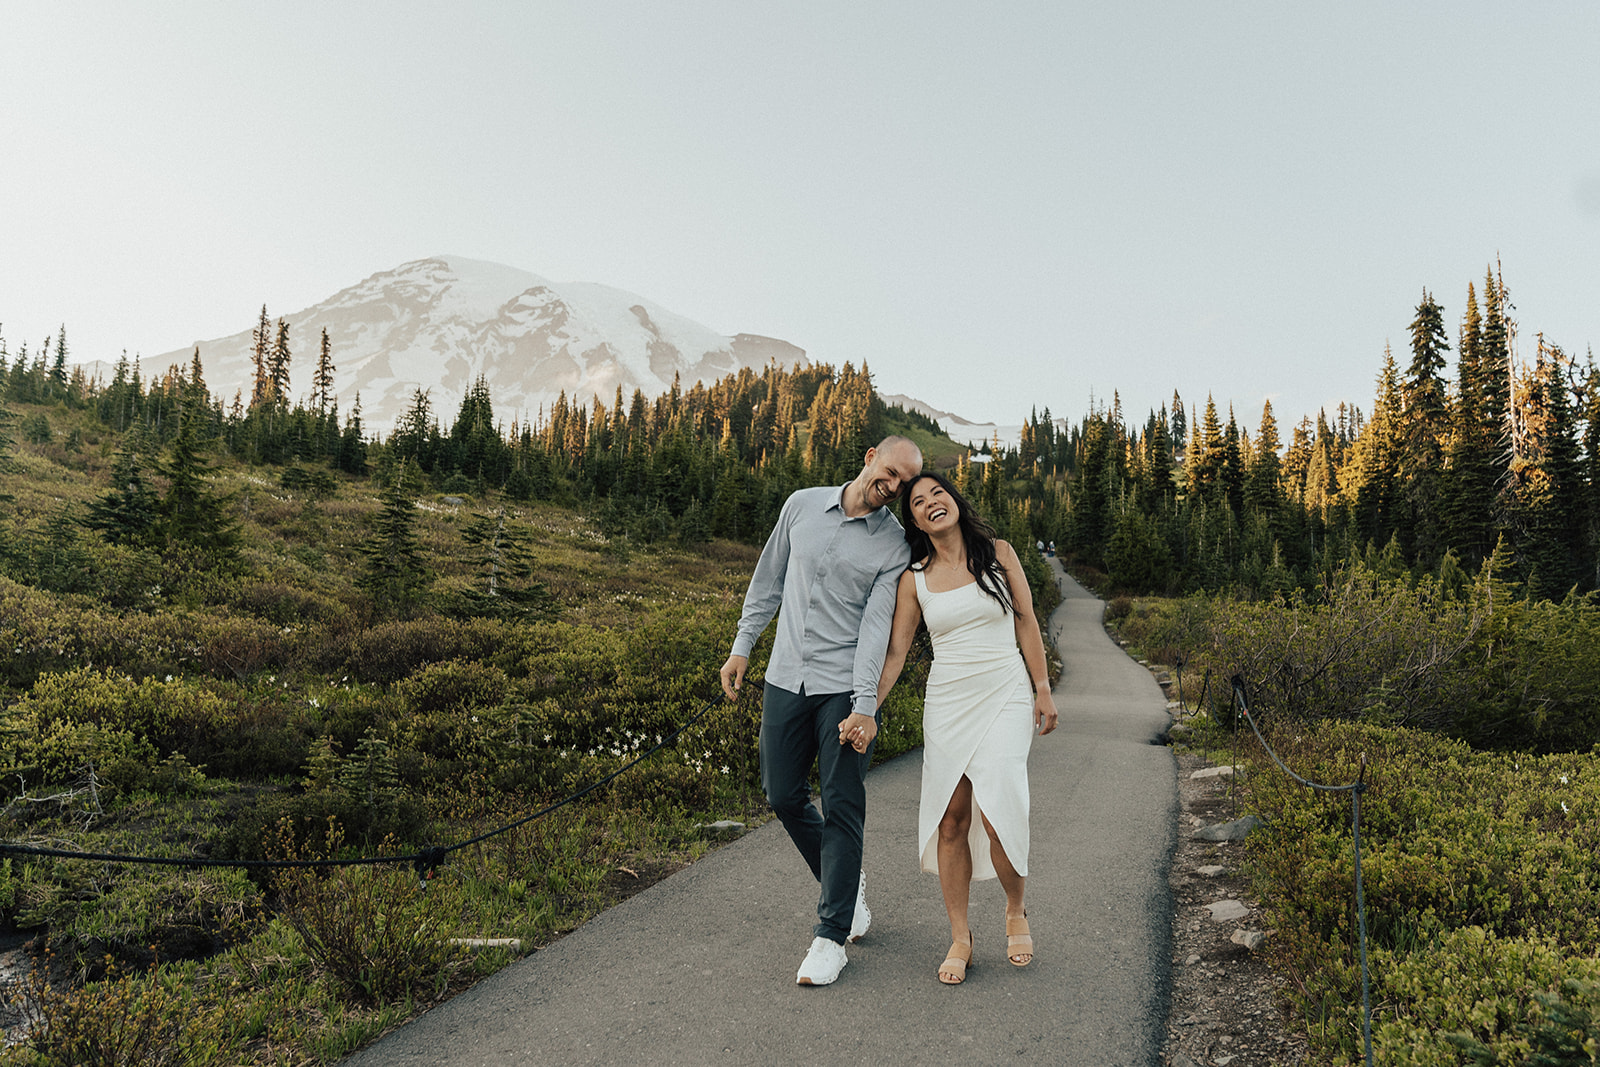 A couple at Mt Rainier photographed by Hallie Kathryn for their engagement photos